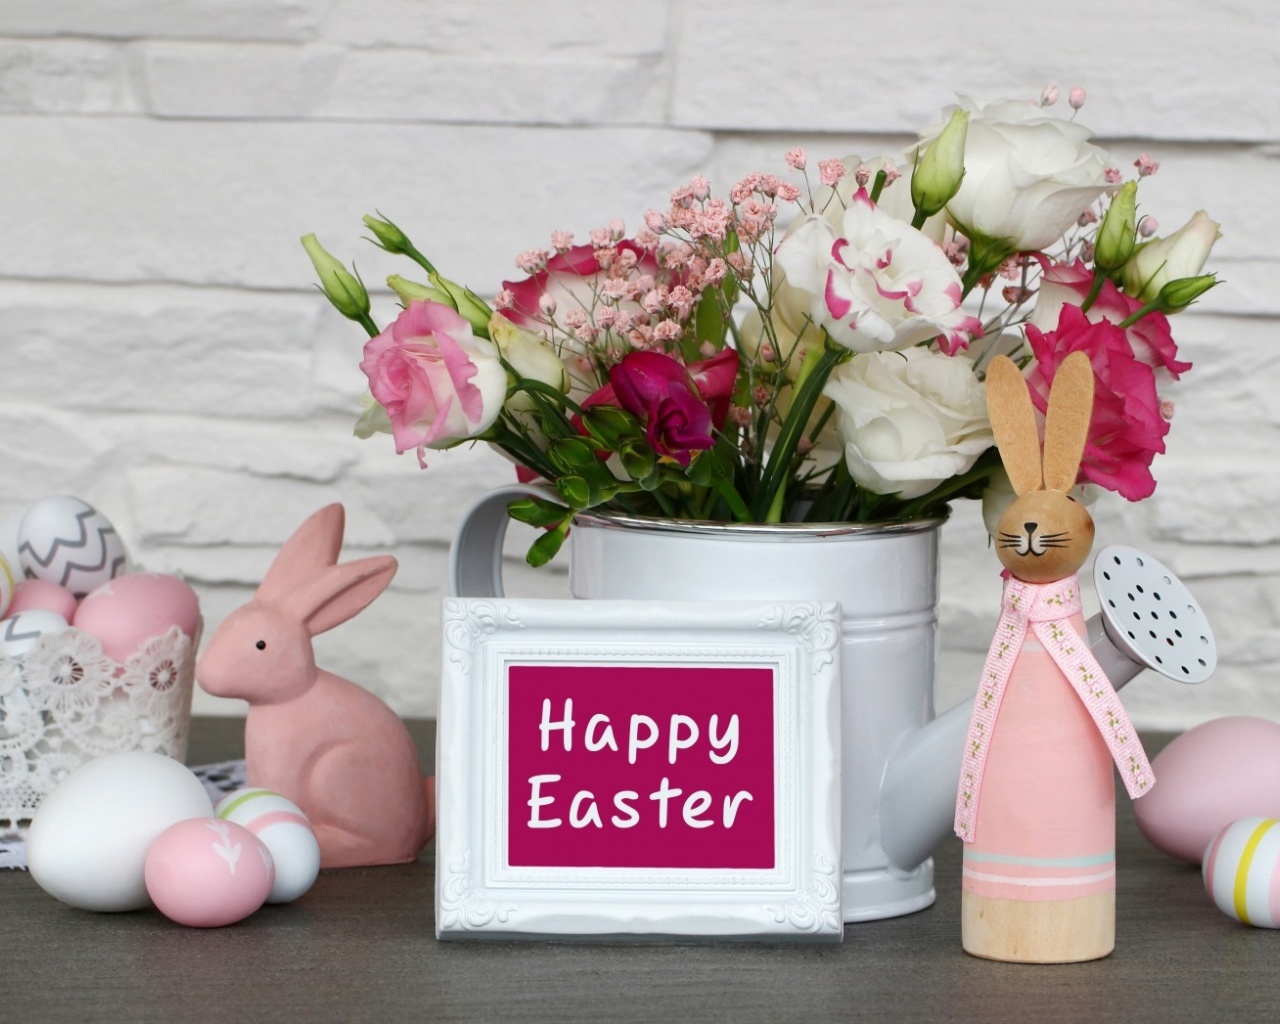 Happy Easter with Hare Figures screenshot #1 1280x1024